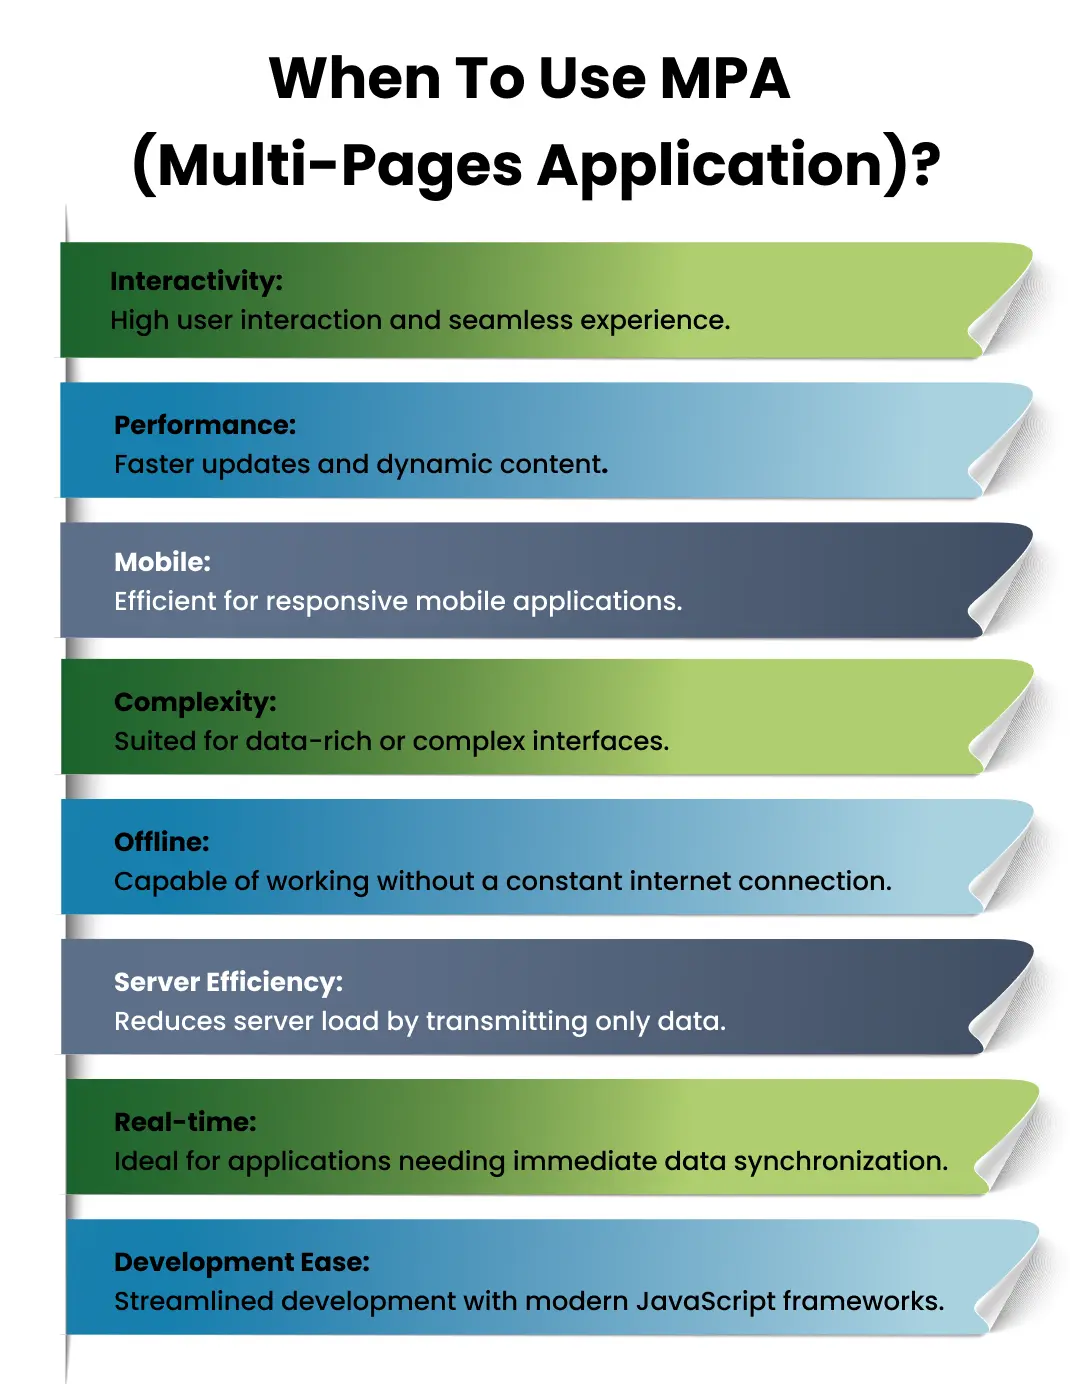 When To Use MPA (Multi Pages Application)